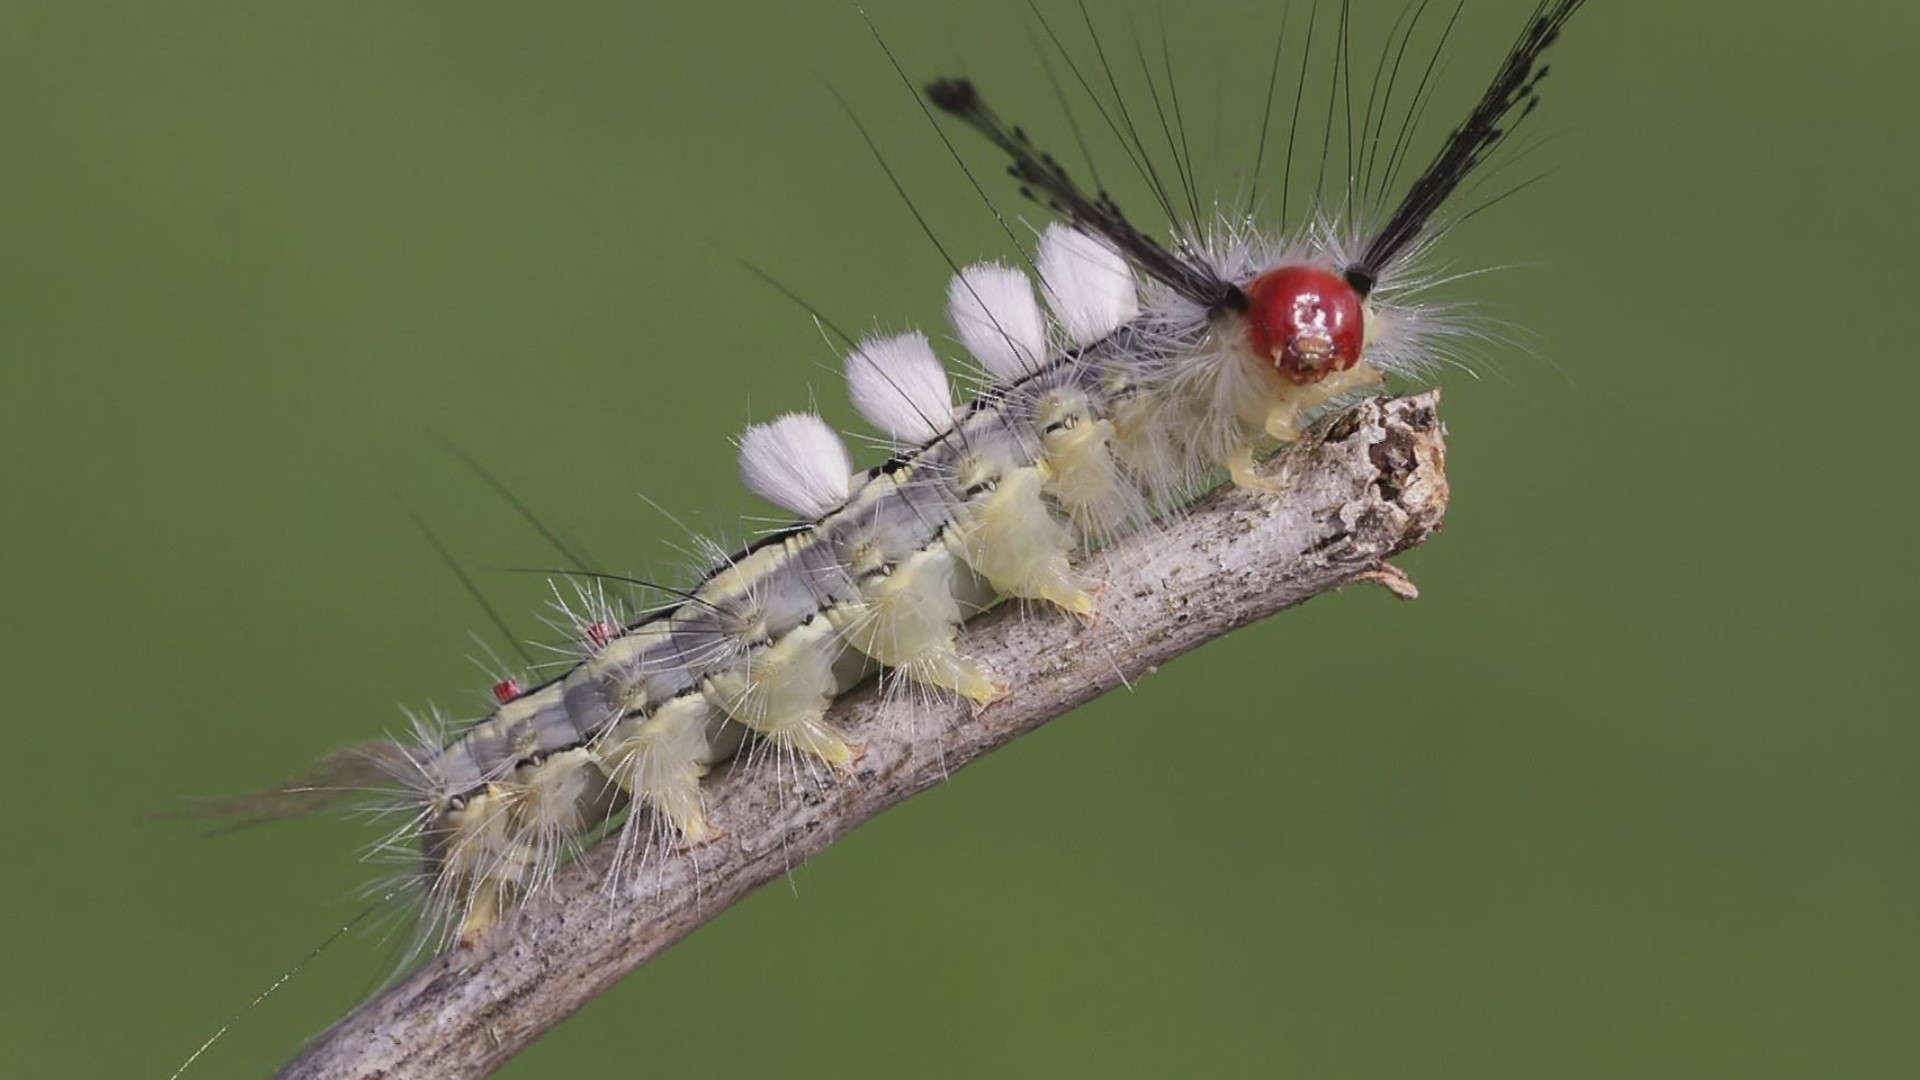 Health experts say a certain kind of hairy caterpillar in Florida can sting and cause rashes.